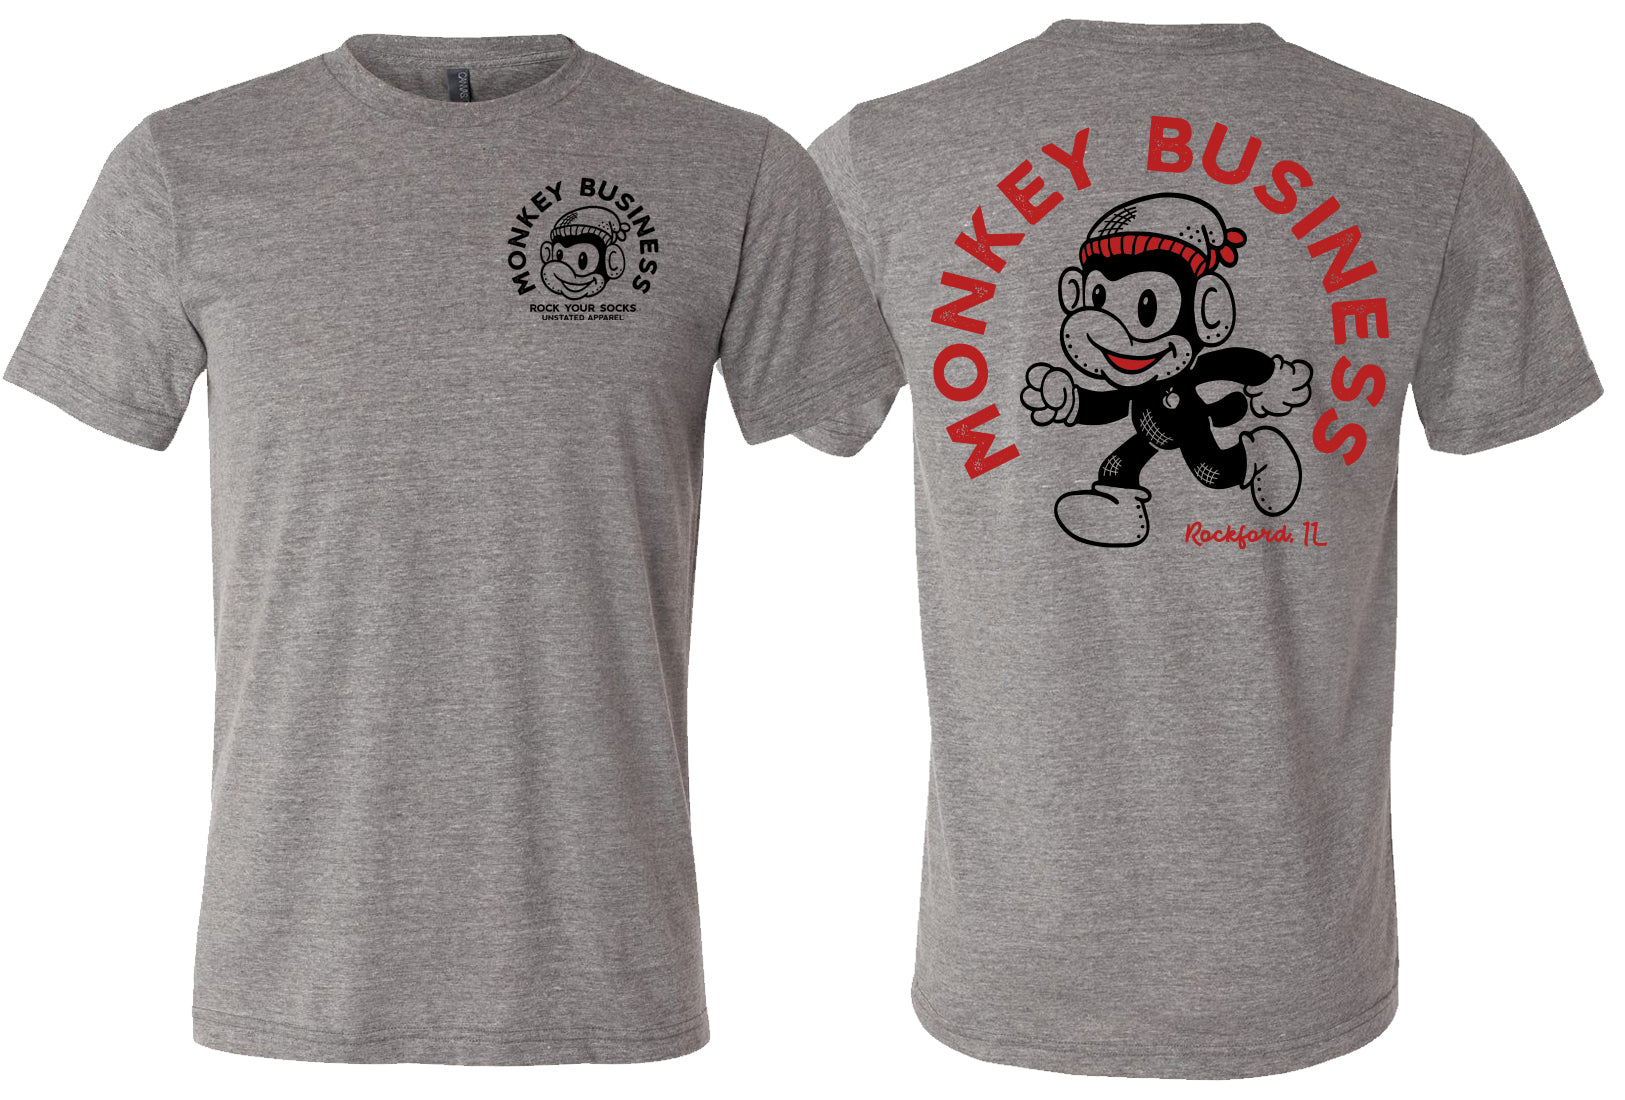 Gray t-shirt with a vintage cartoon monkey on it and MONKEY BUSINESS around it